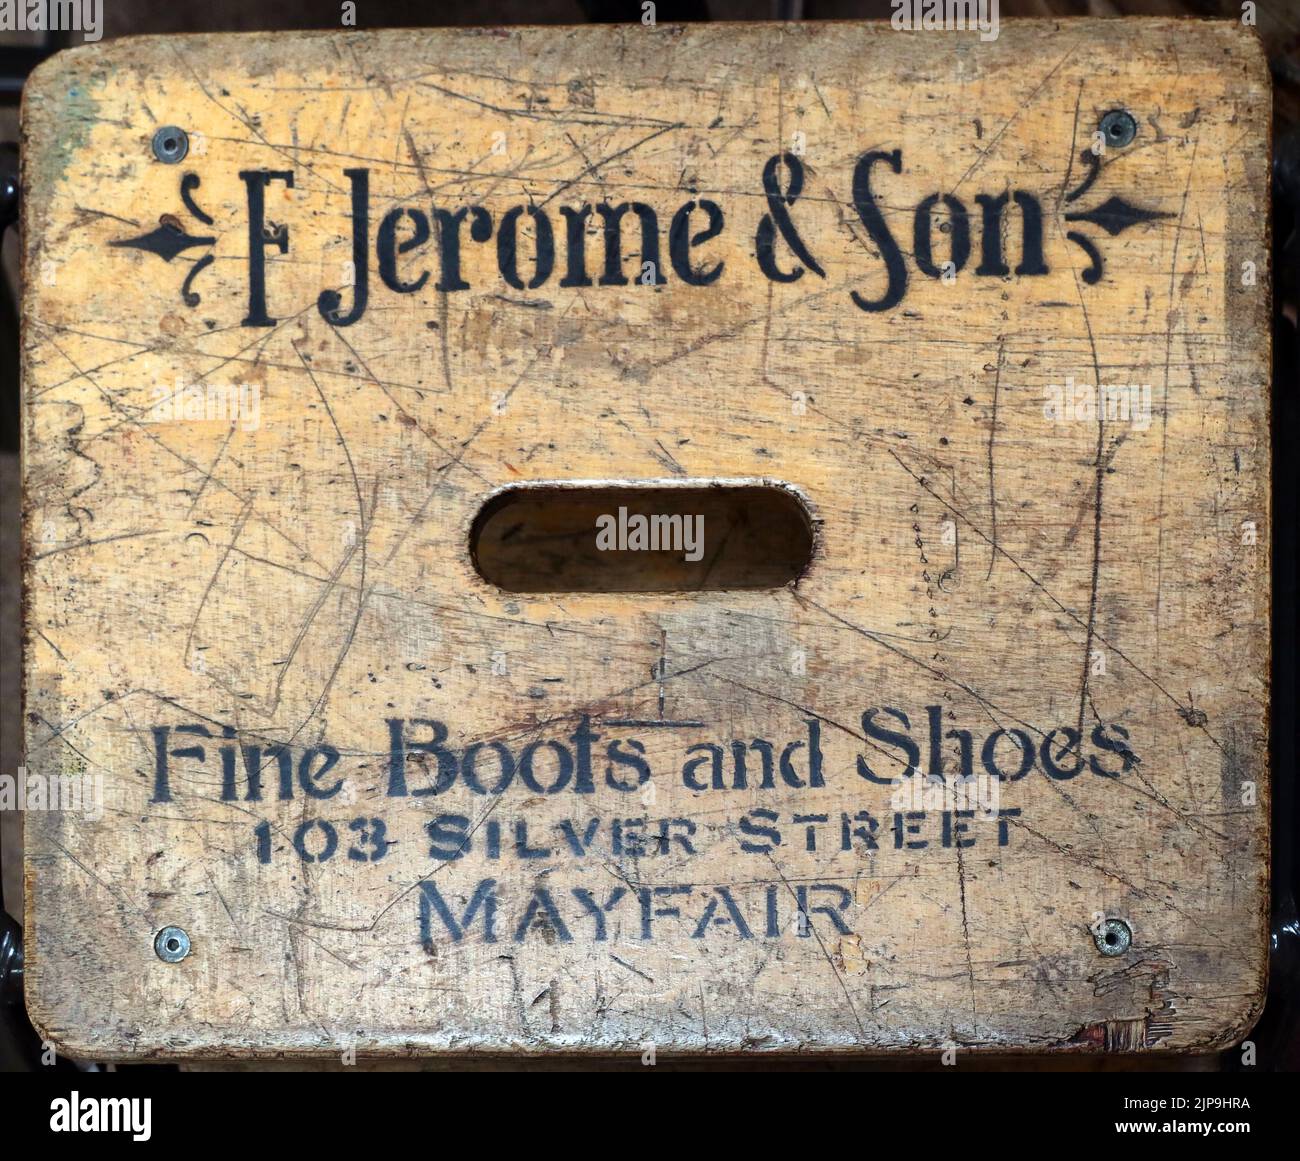 Old wooden crate, F Jerome & Sons, fine boots and shoes, 103 Silver Street, Mayfair, London, England, UK Stock Photo